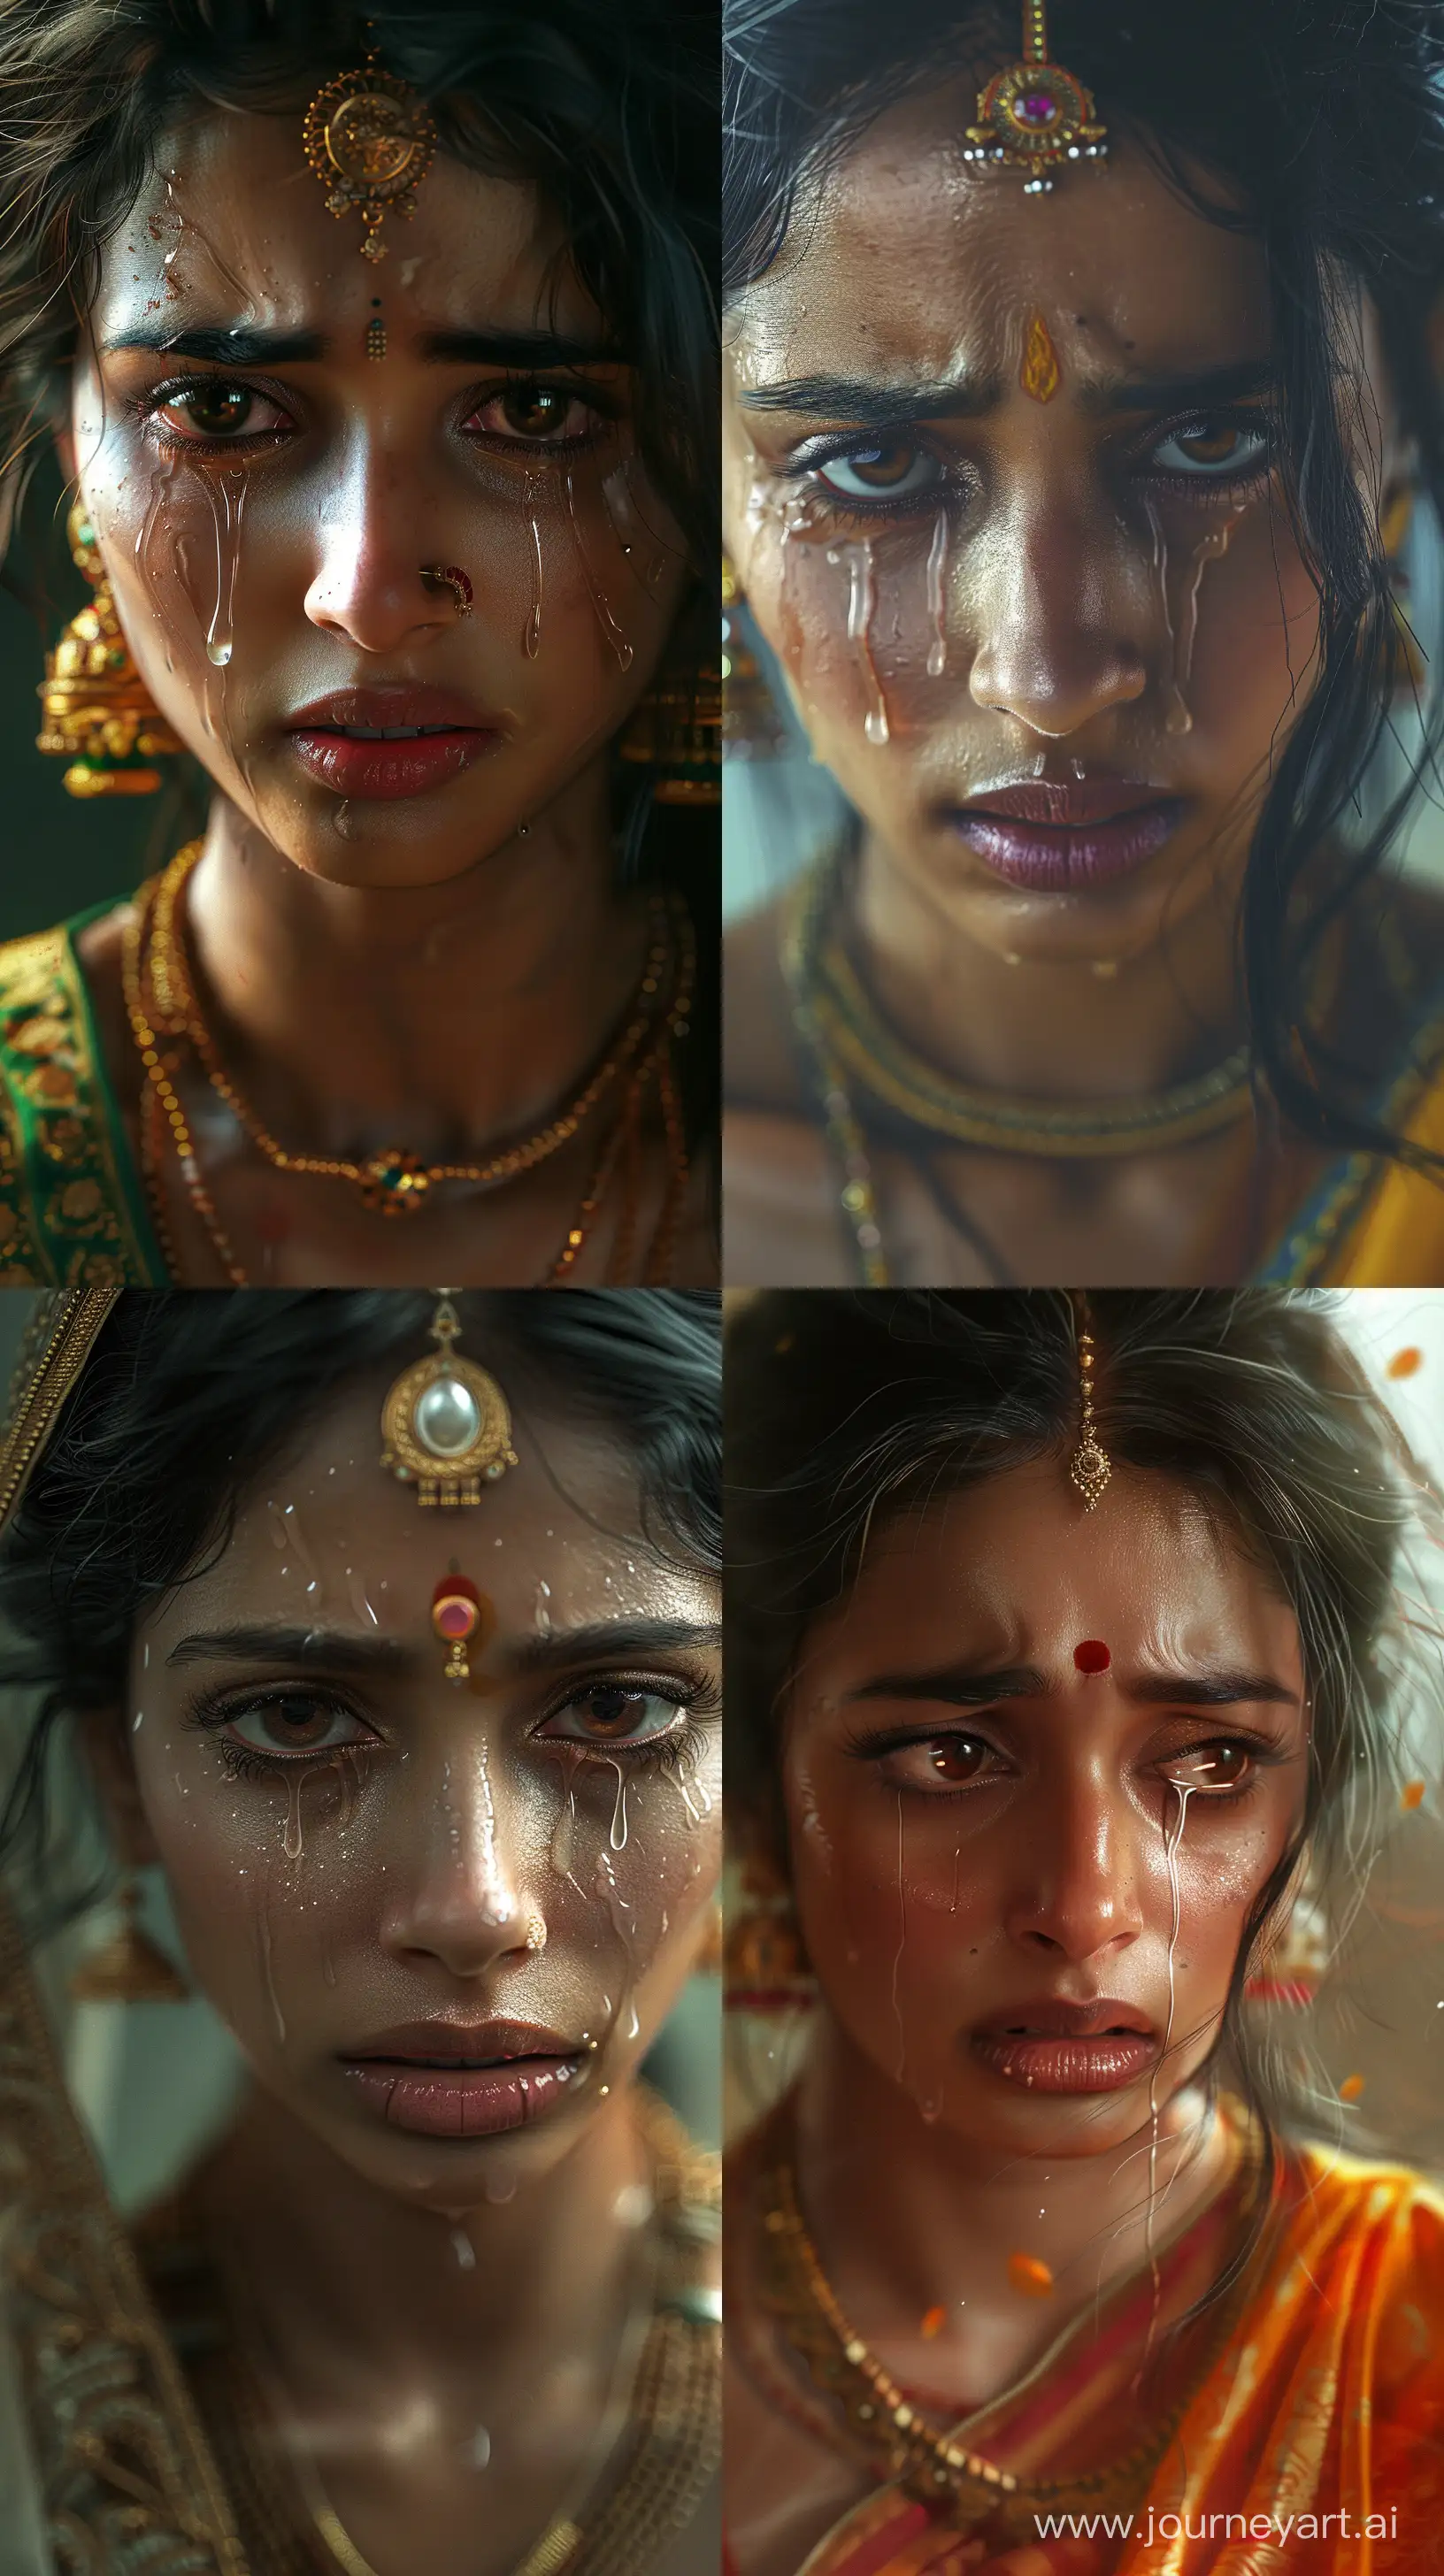 Expressive-Indian-Woman-Portrait-Capturing-Emotion-in-Intricate-Detail